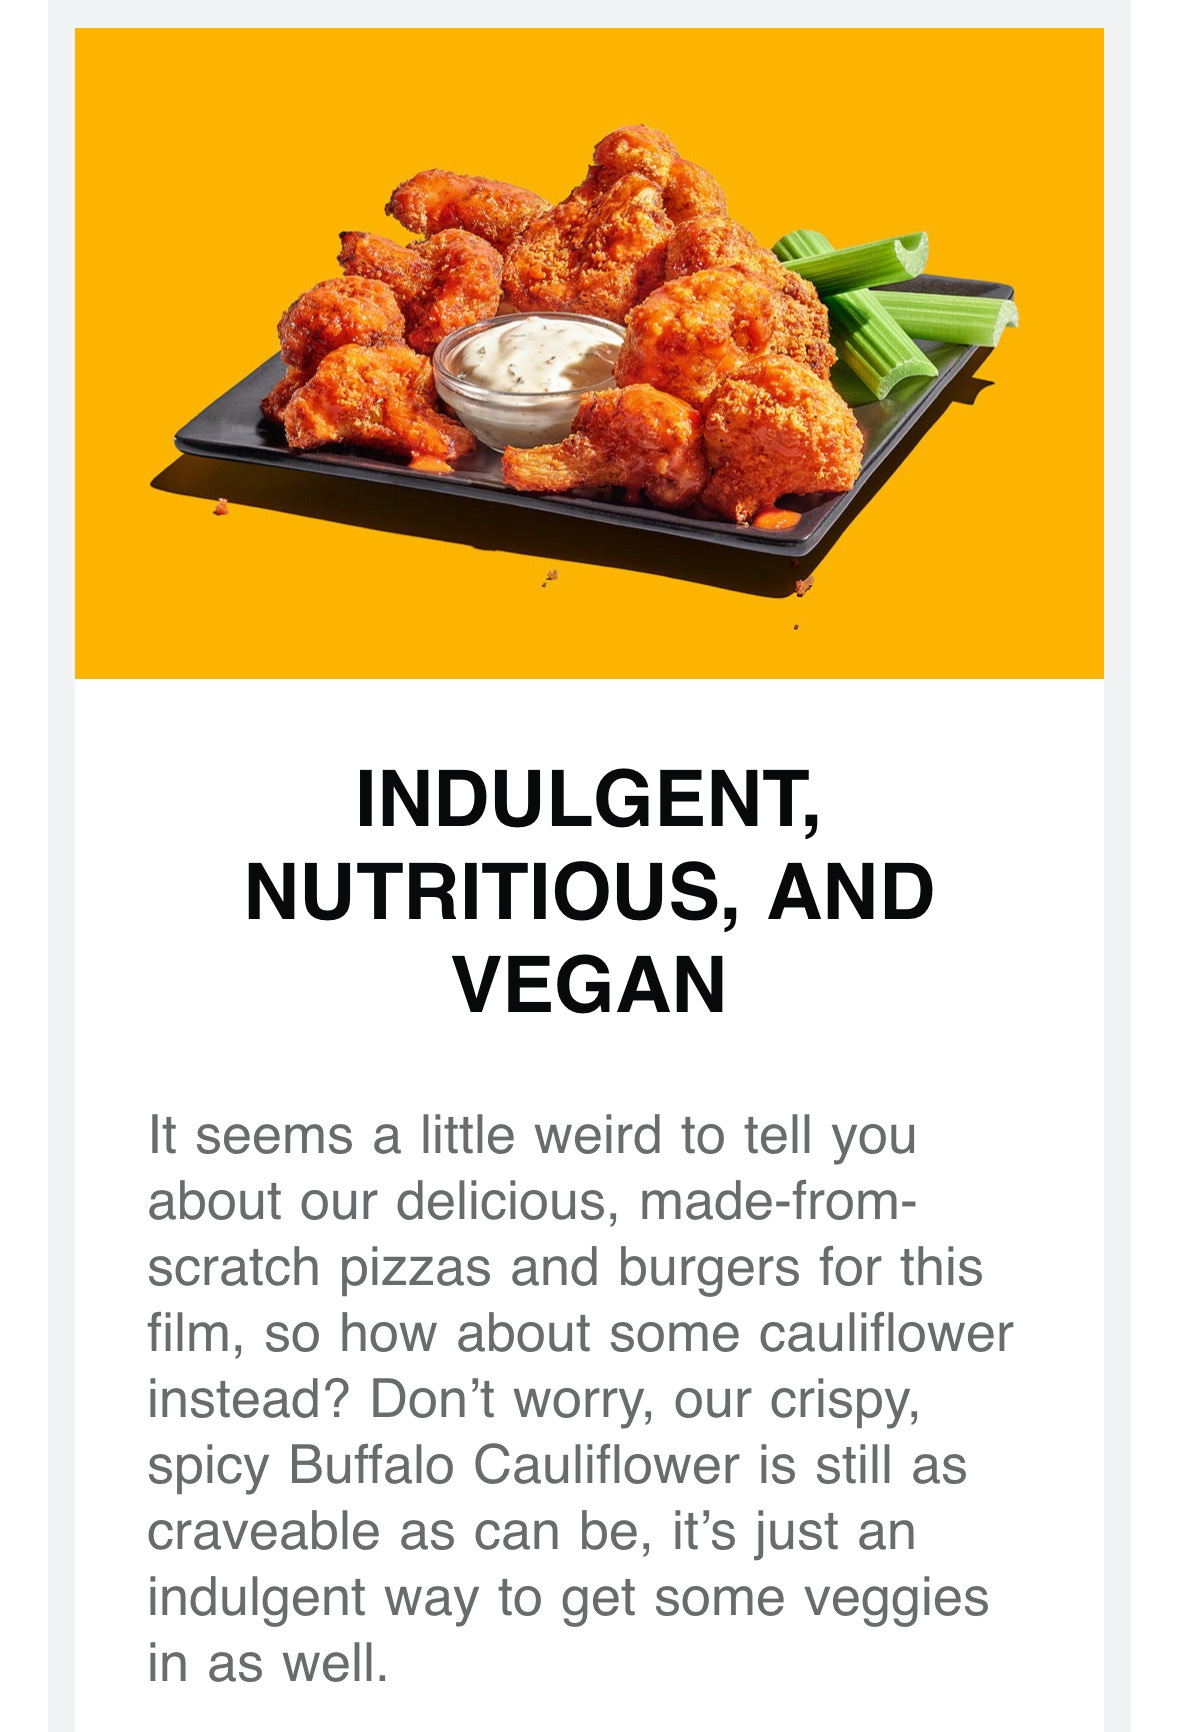 Photo of buffalo cauliflower with text that reads INDULGENT, NUTRITIOUS, AND VEGAN It seems a little weird to tell you about our delicious, made-from-scratch pizzas and burgers for this film, so how about some cauliflower instead? Don’t worry, our crispy, spicy Buffalo Cauliflower is still as craveable as can be, it’s just an indulgent way to get some veggies in as well.